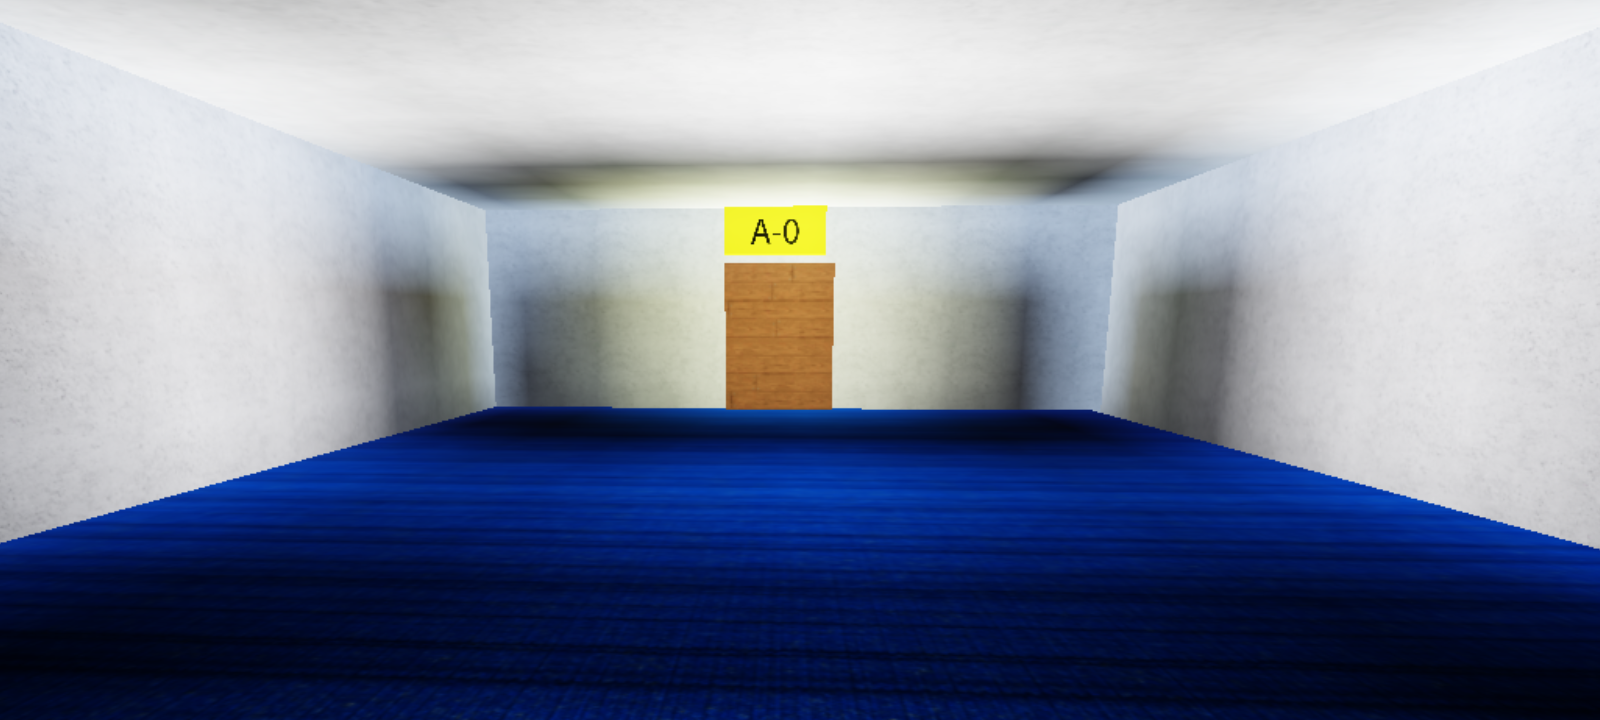 A-510, The Rooms Ideas Wiki